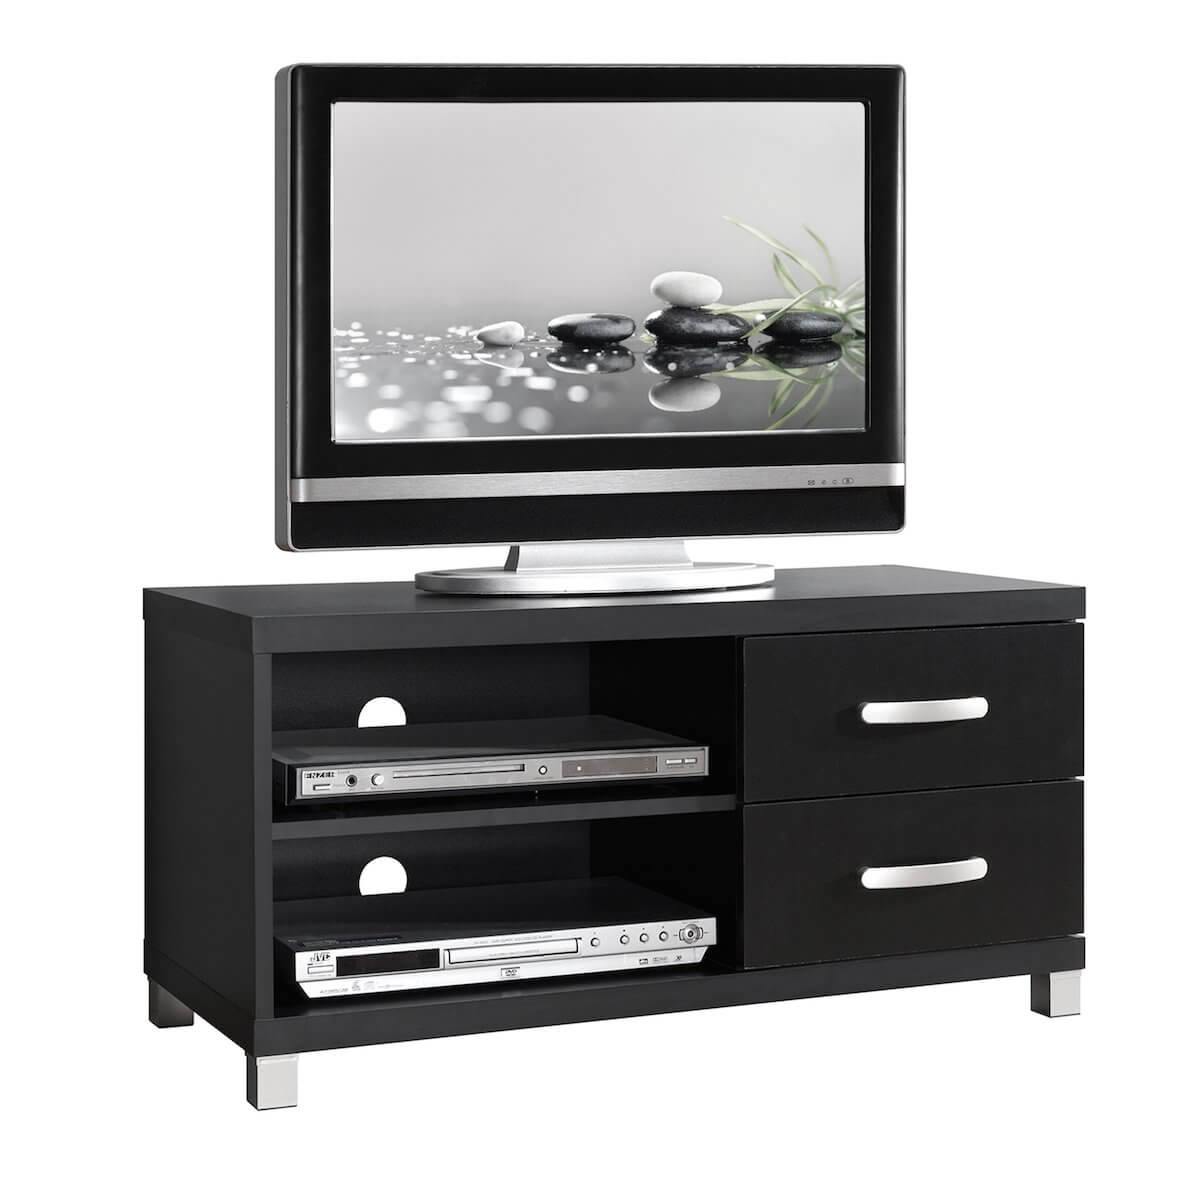 Techni Mobili Black Modern TV Stand with Storage for TVs Up To 40" RTA-8896-BK with TV